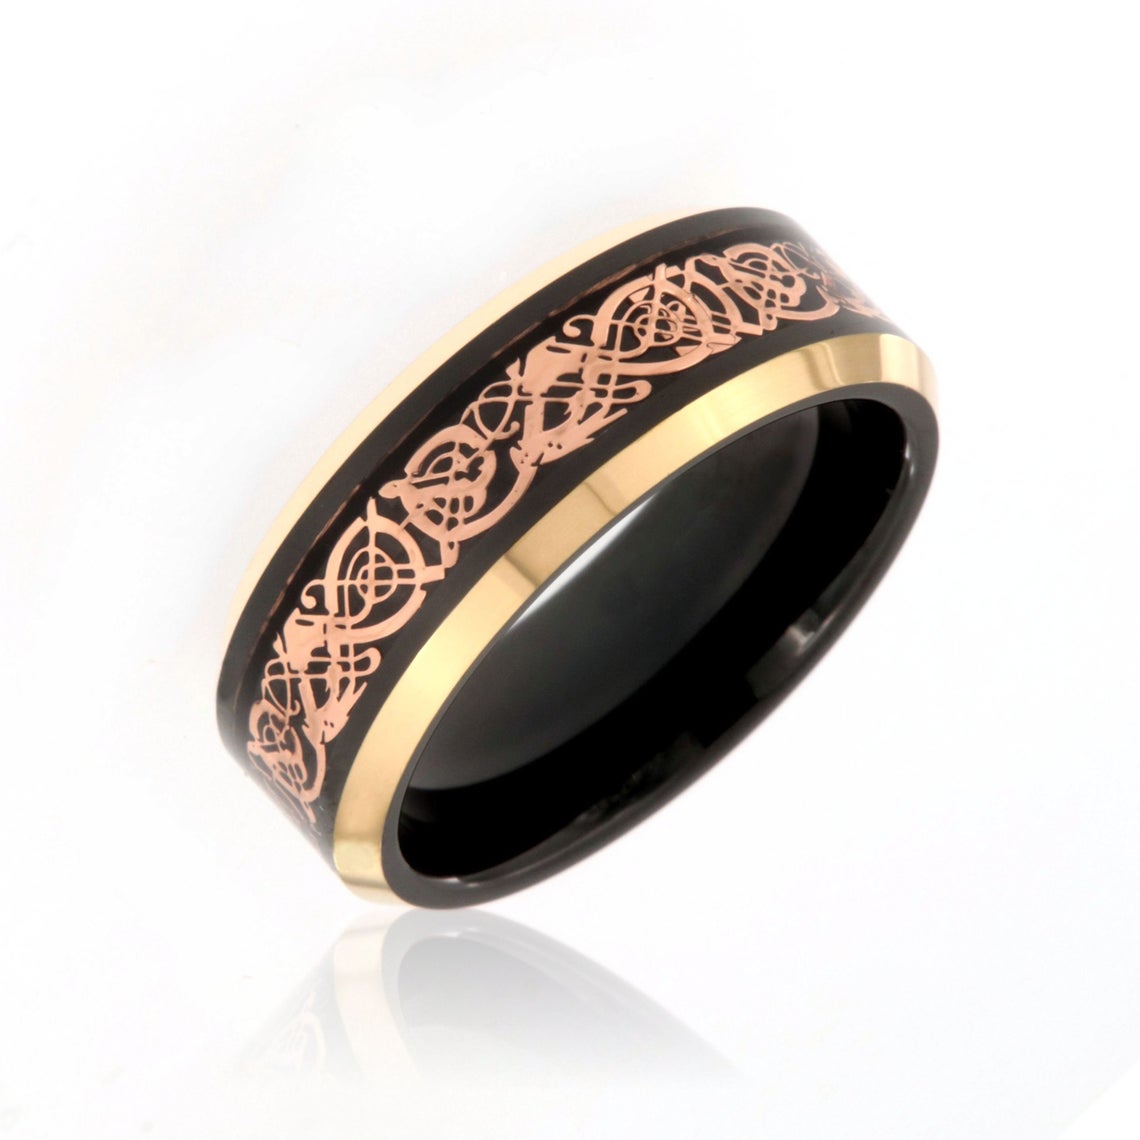 8mm wide tungsten ring with Celtic earth design with black and rose gold finishes